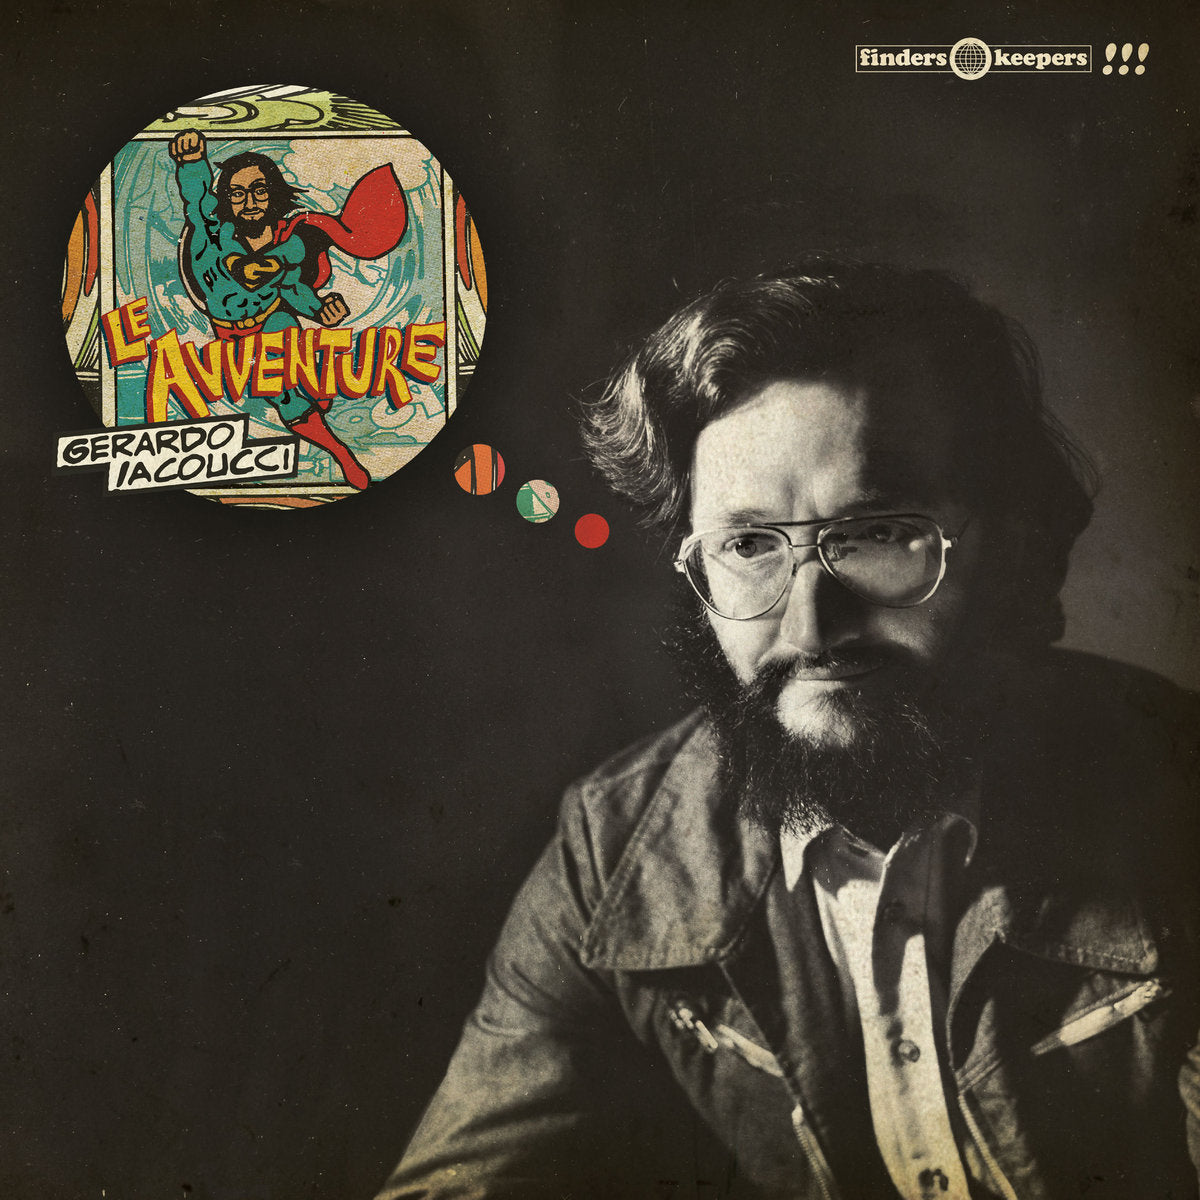 Gerardo Iacoucci - Le Avventure (Finders Keepers Records)